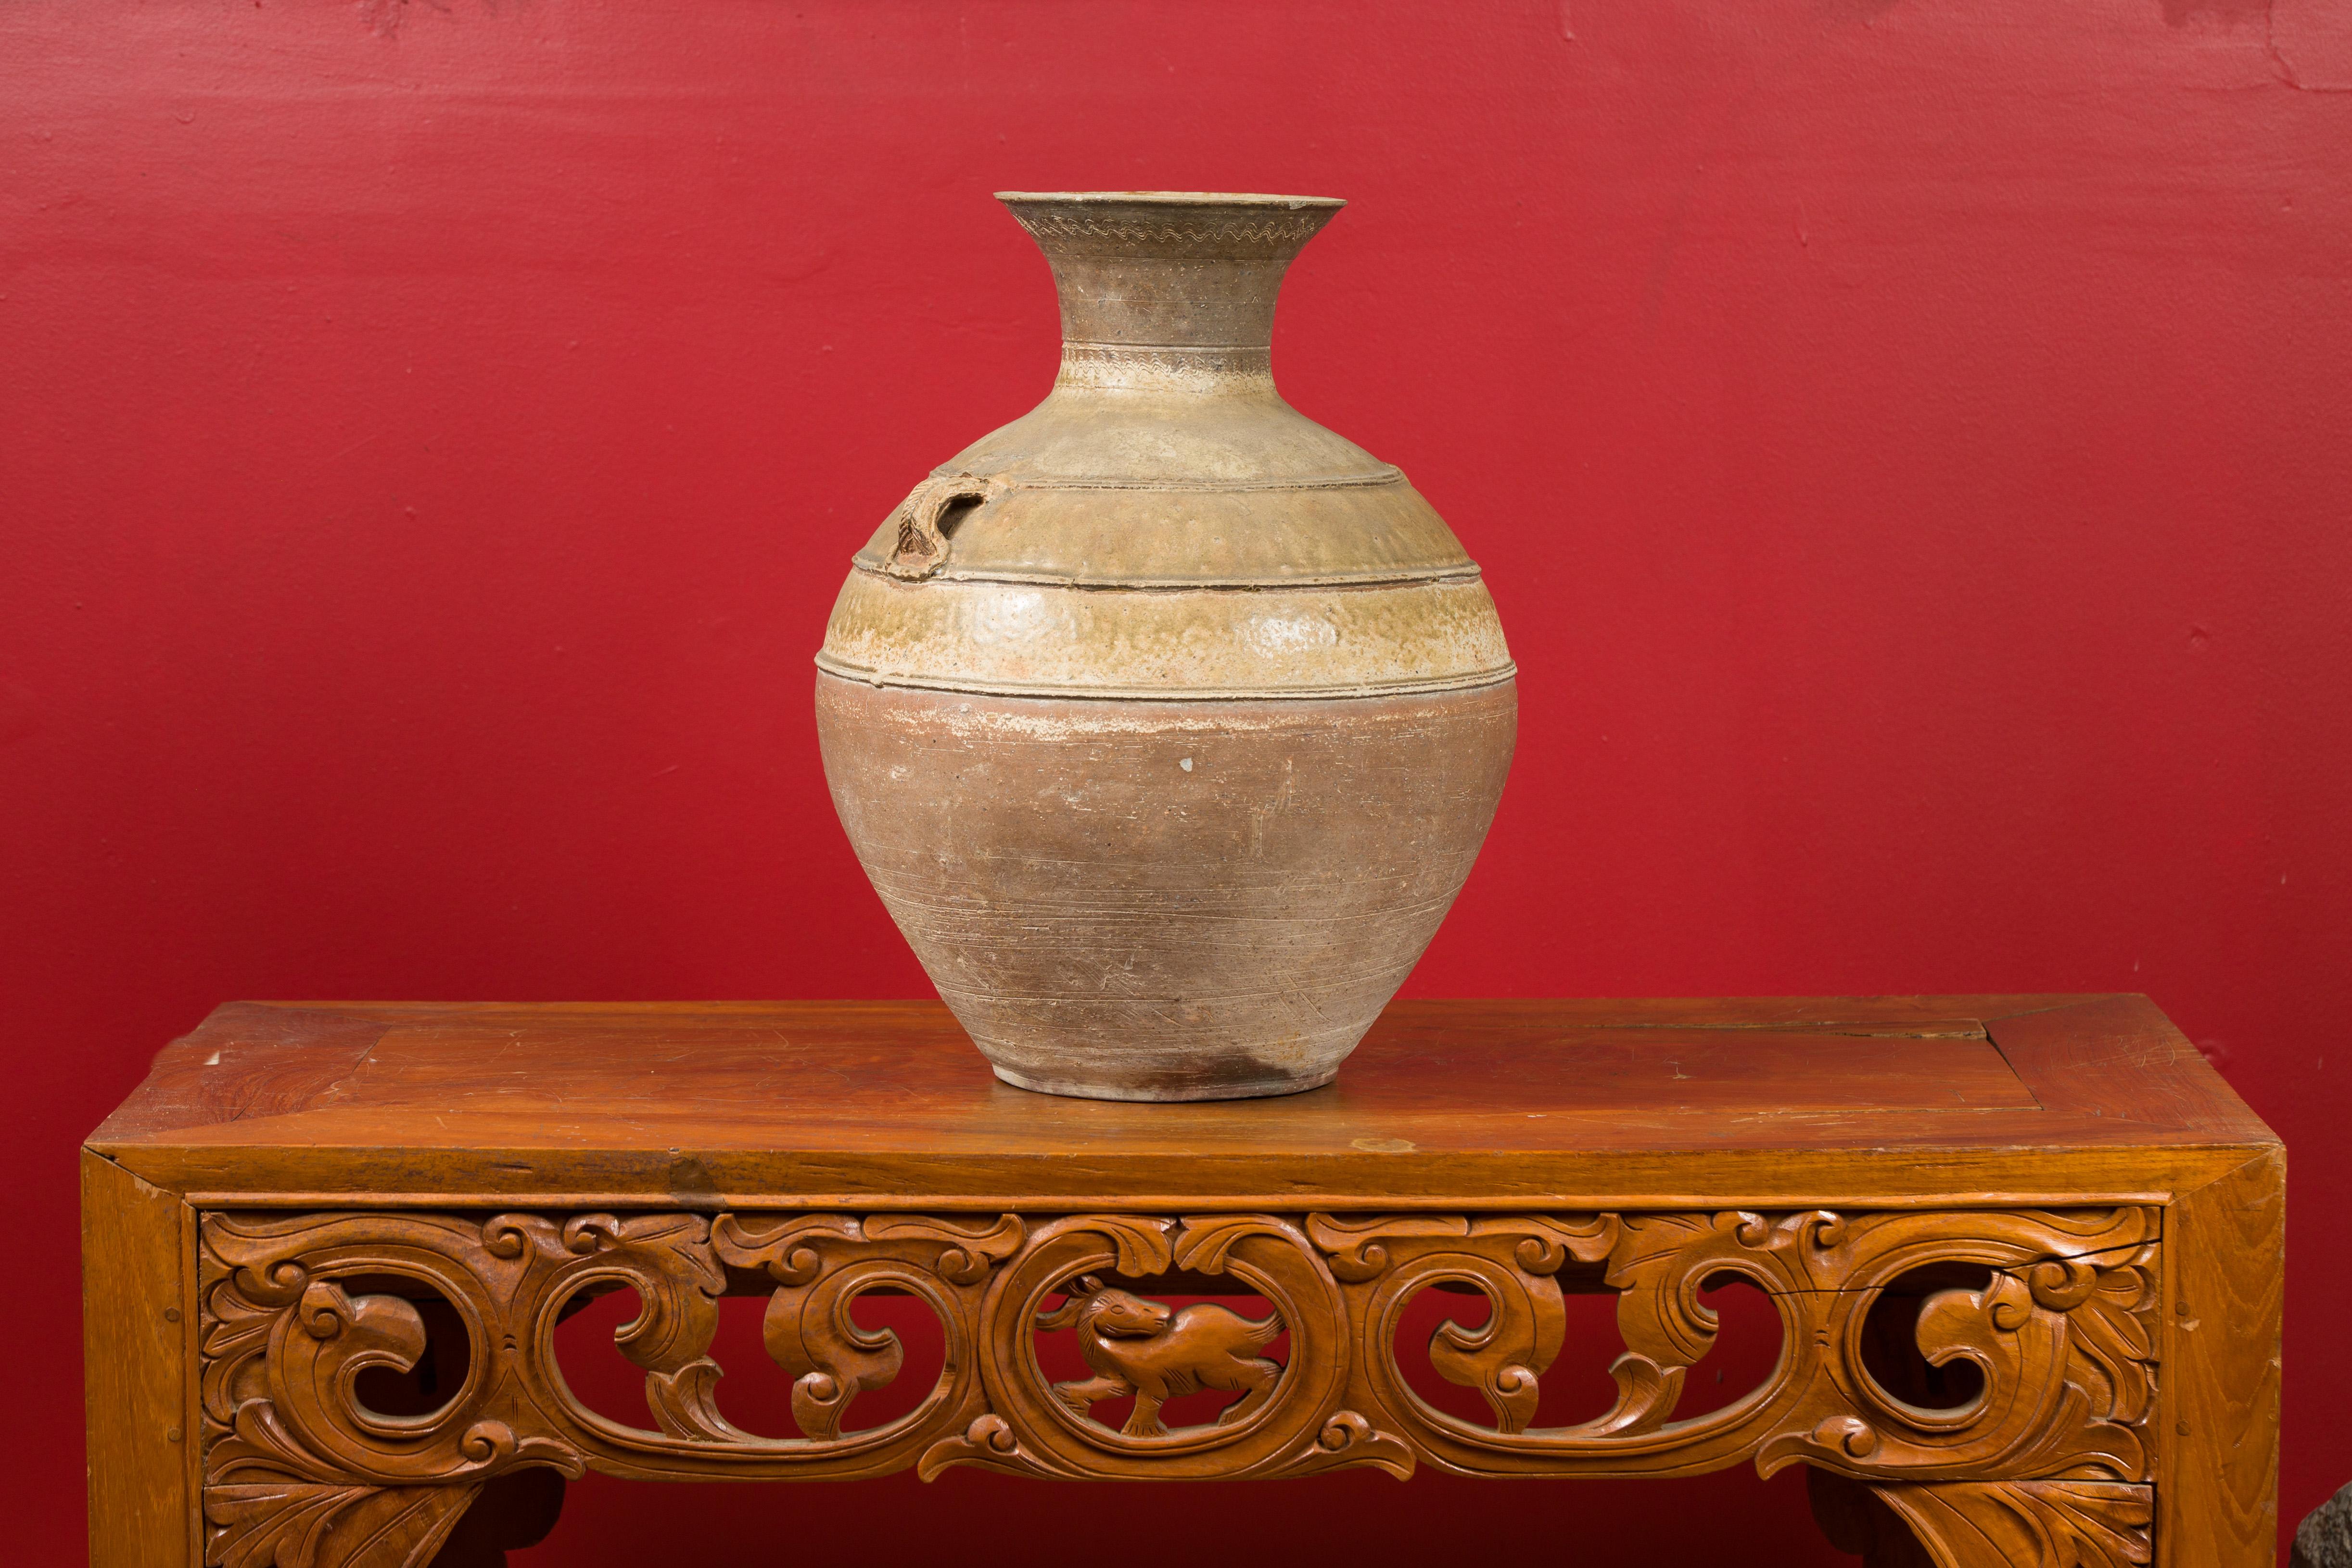 Chinese Han Dynasty Glazed Hu Vessel with Petite Handles, circa 202 BC-200 AD For Sale 2